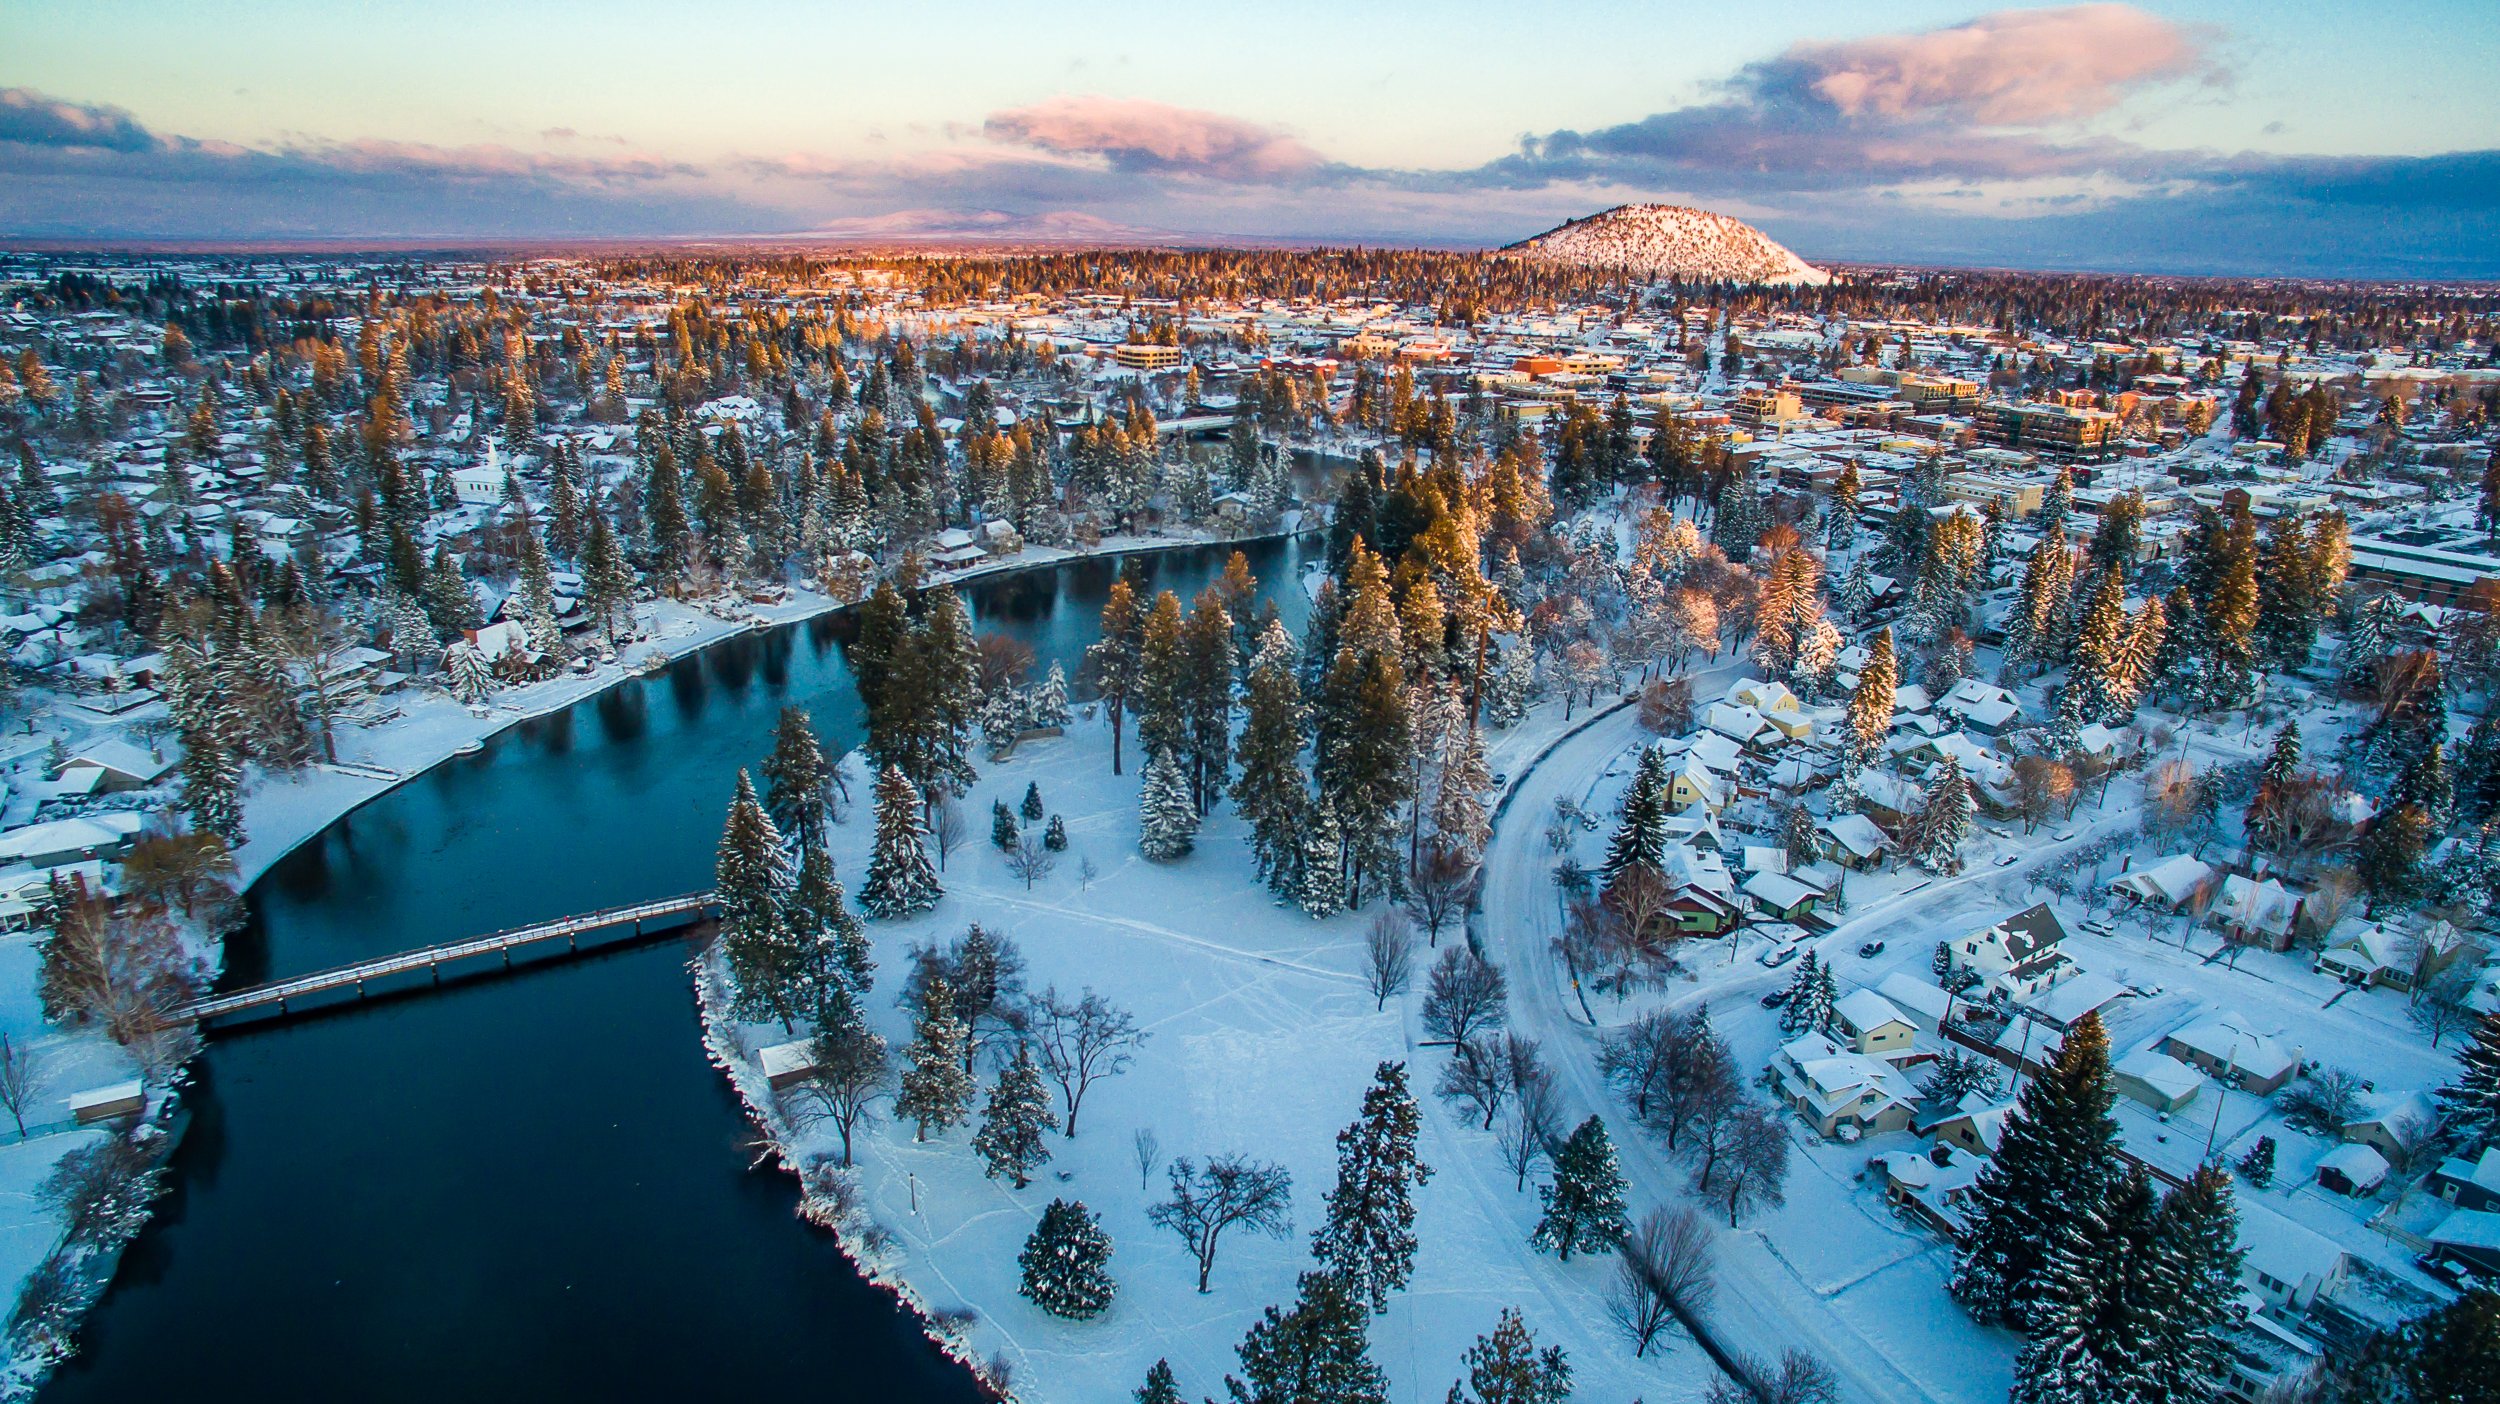 Bend, OR in winter.